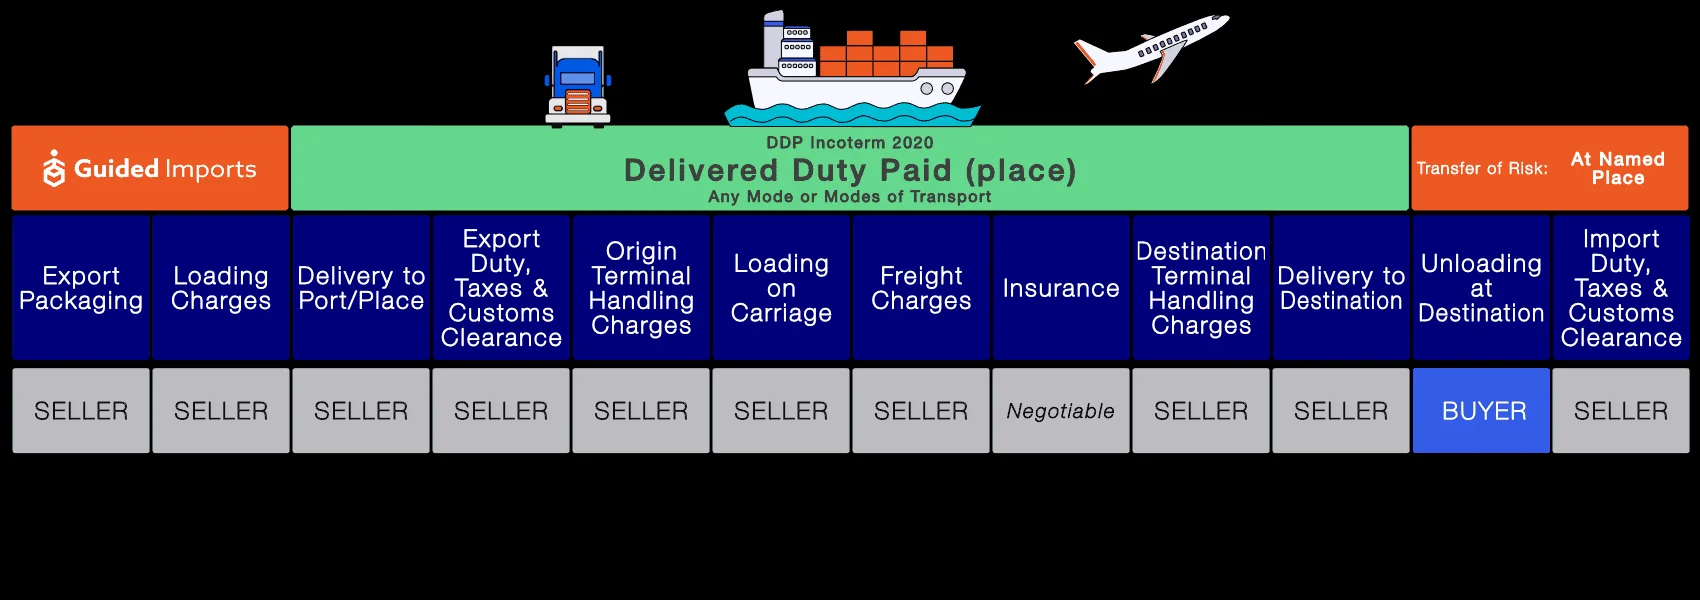 East Shipping To Cote d'Ivoire Freight Forwarder Shipping Agent Logistics Services DDP Double Clearance Tax Ship Cote d'Ivoire factory